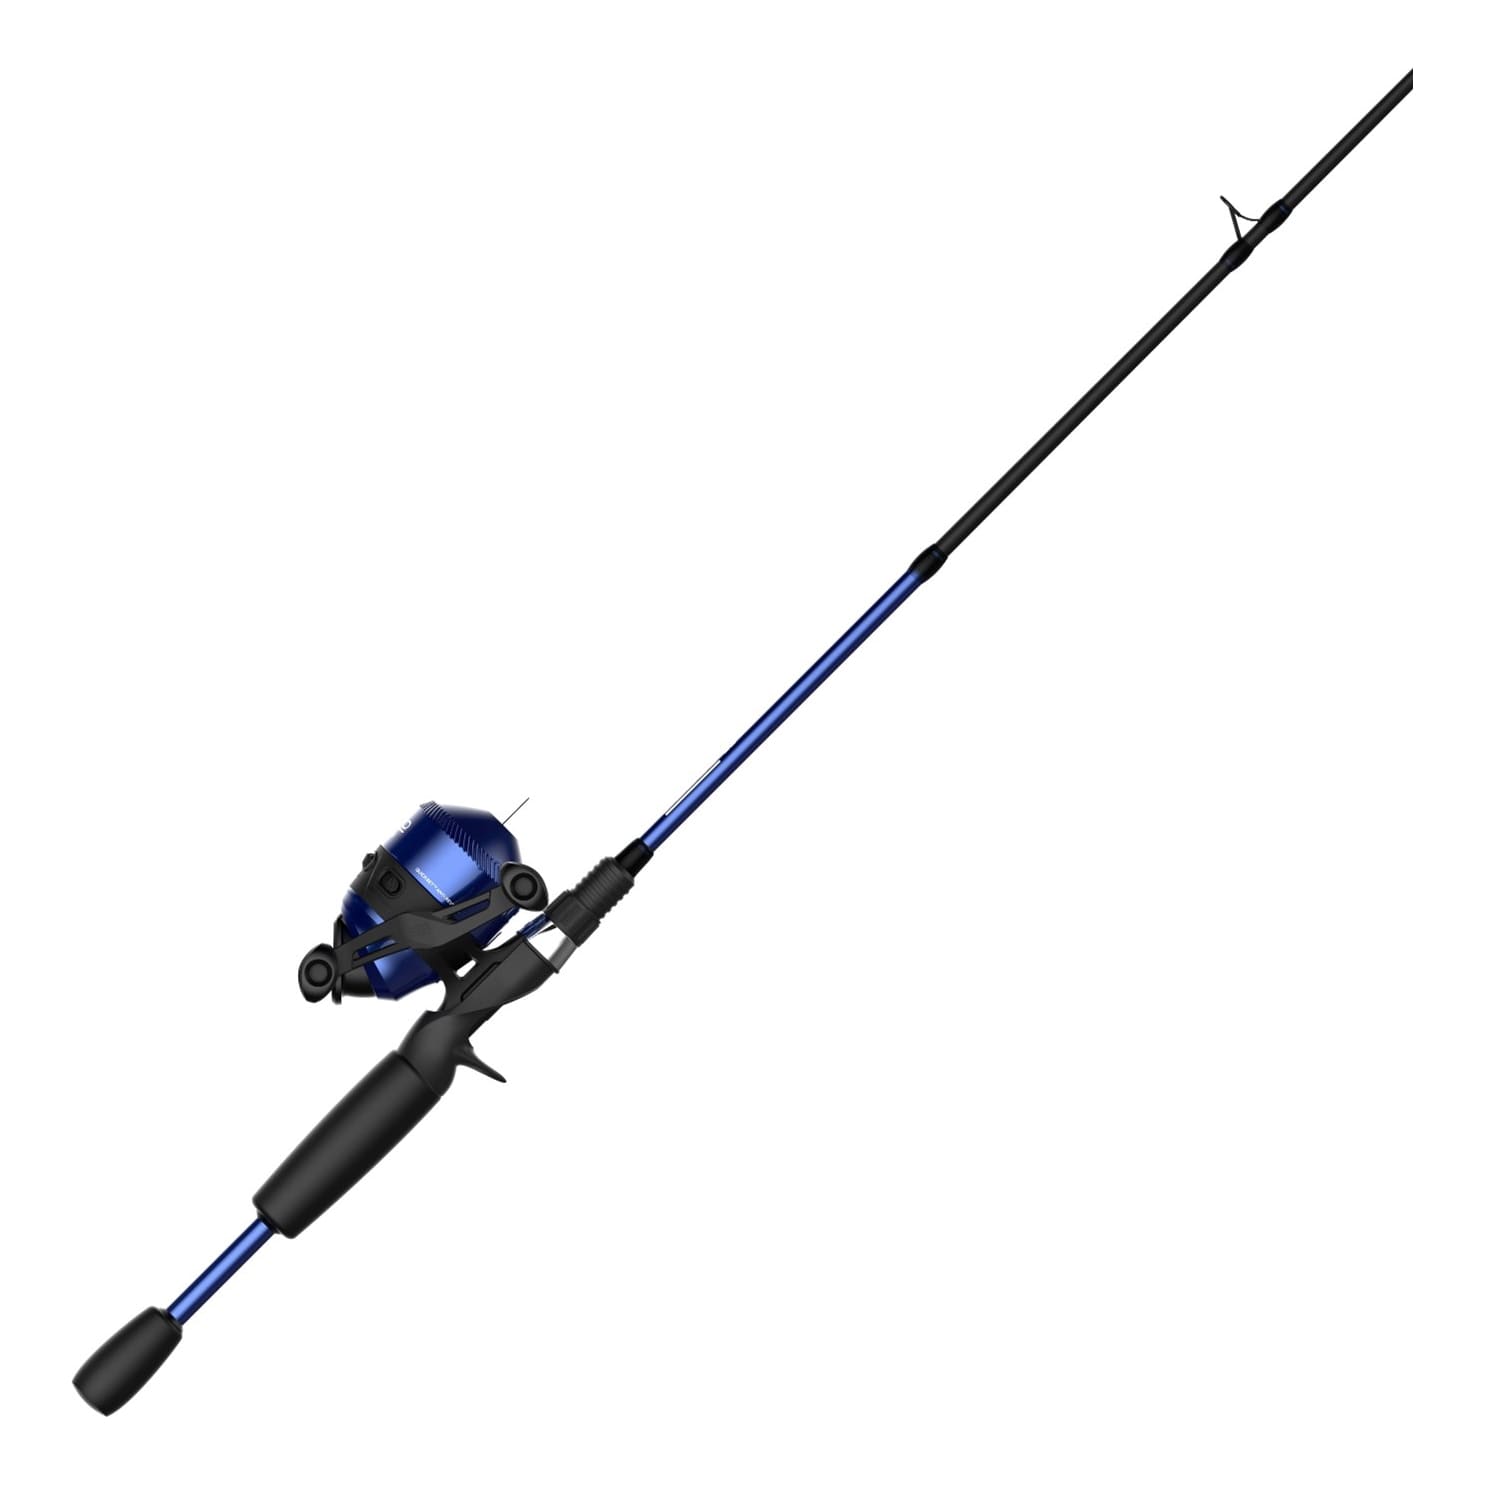 Zebco 33 Micro Spincast Rod And Reel Combo